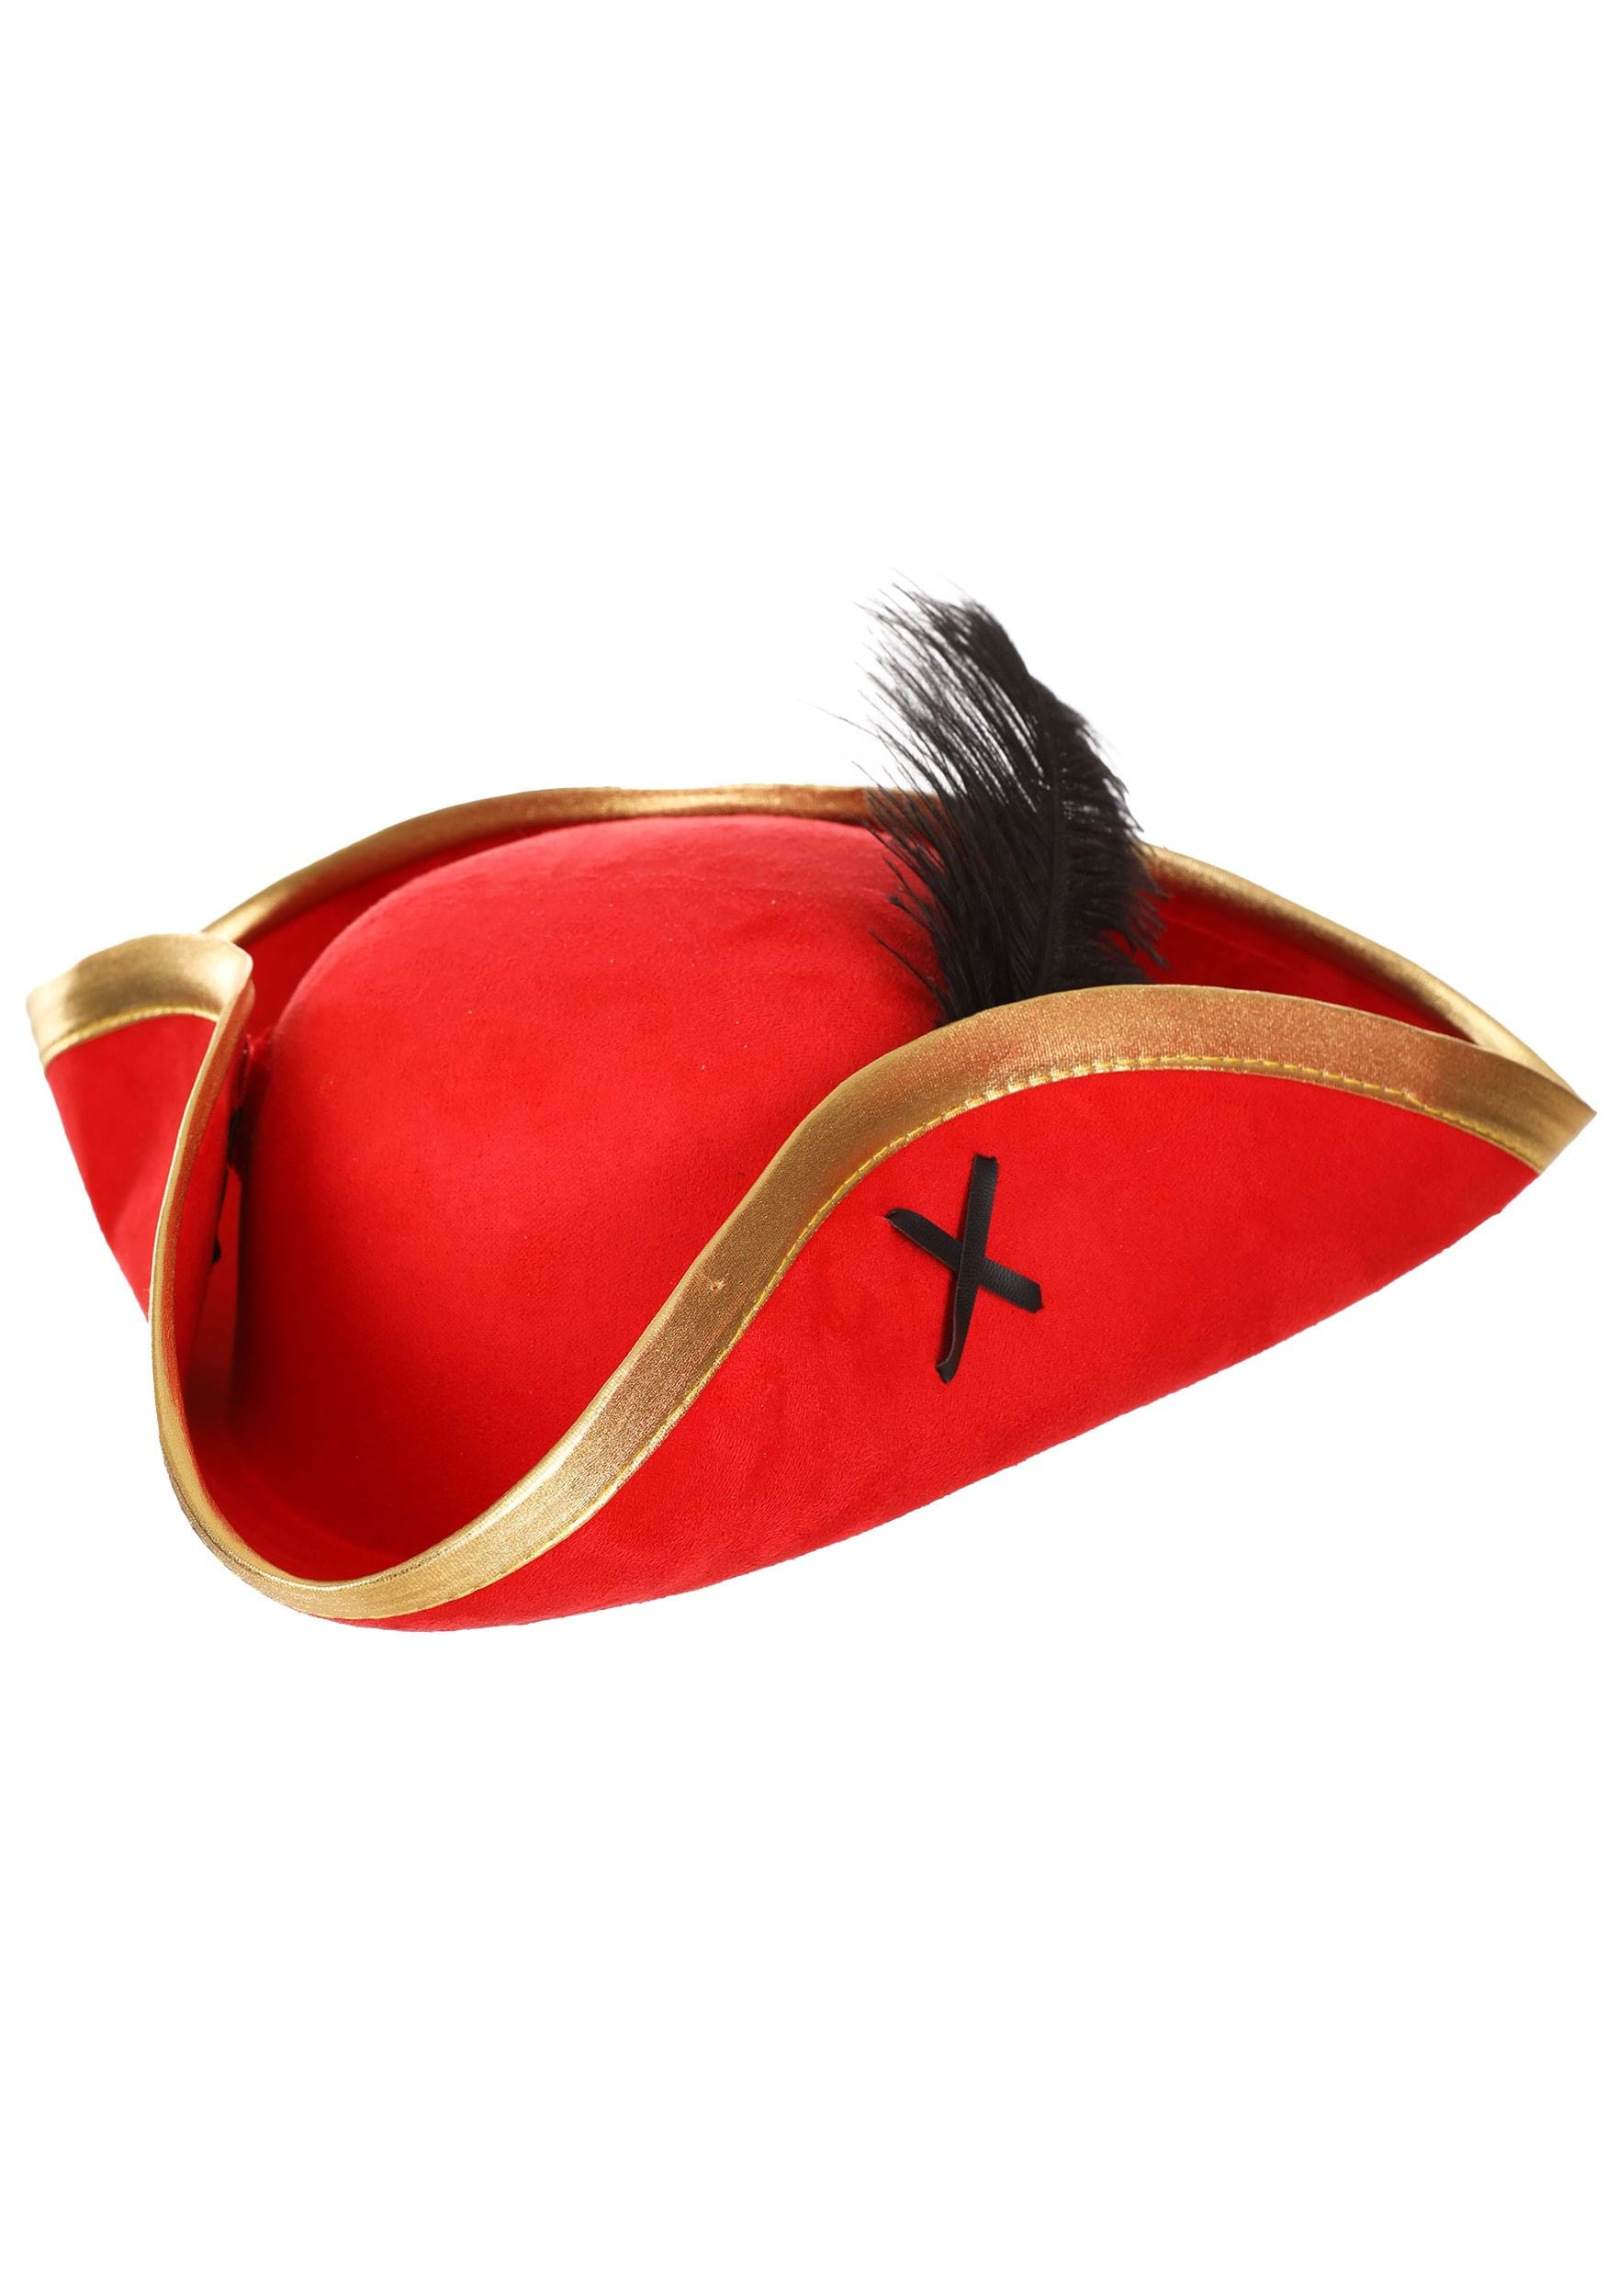 Red Skull And Crossbones Pirate Costume Accessory Hat